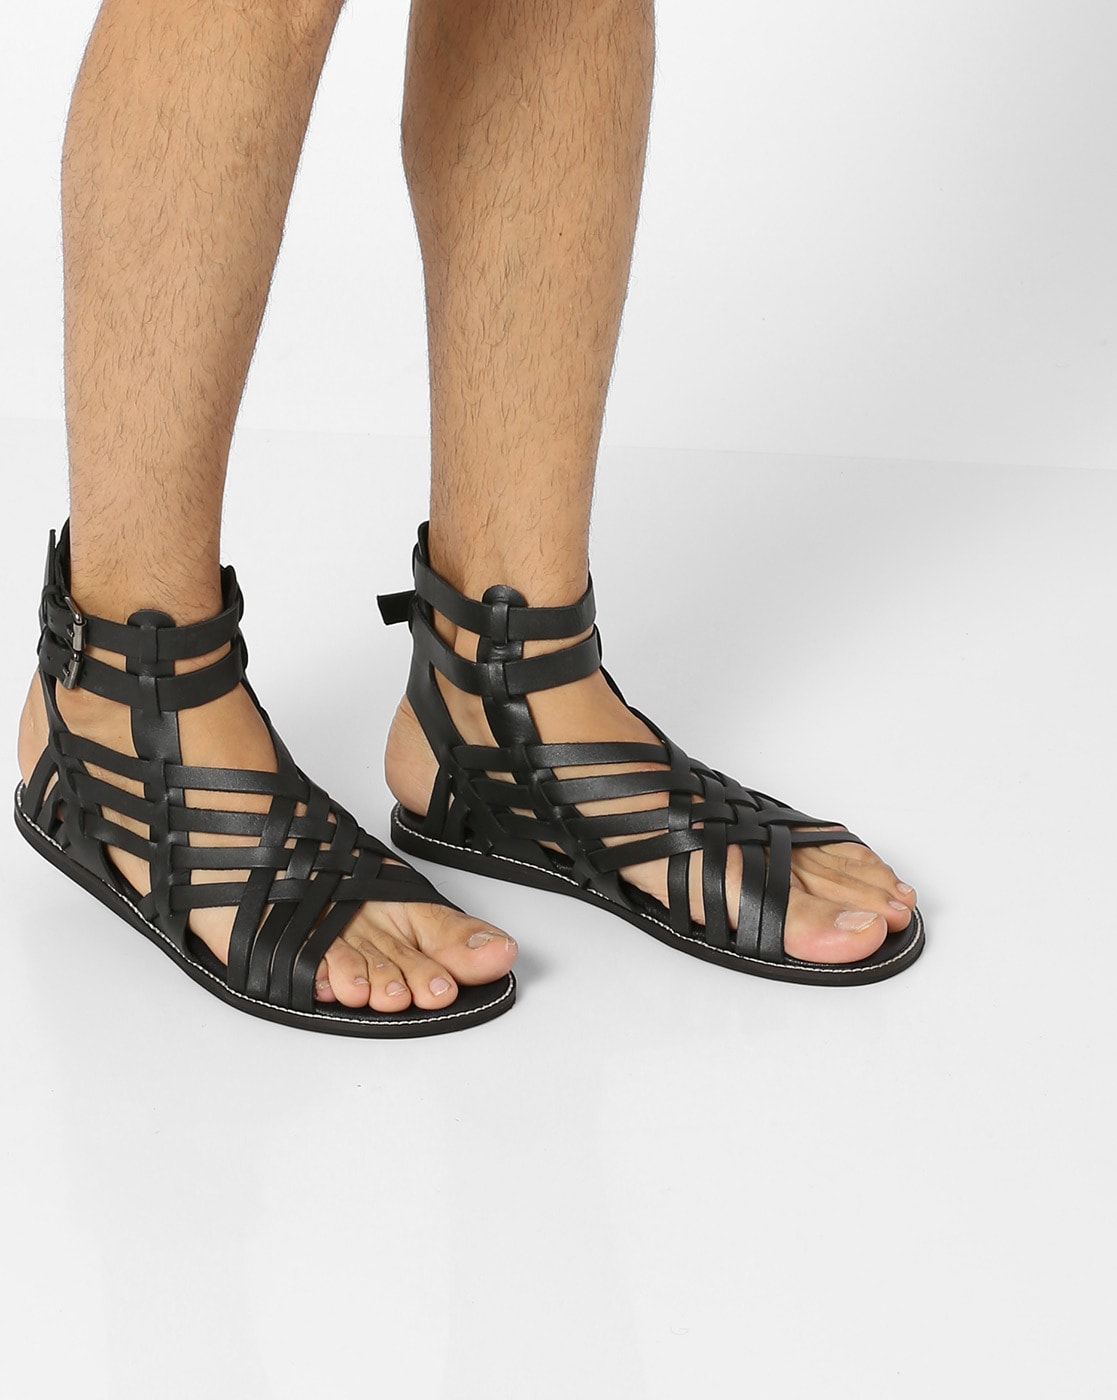 Buy Gladiator Leather Sandals, Greek Sandals, Black Sandals, Summer Shoes,  Made From 100% Genuine Leather. Online in India - Etsy